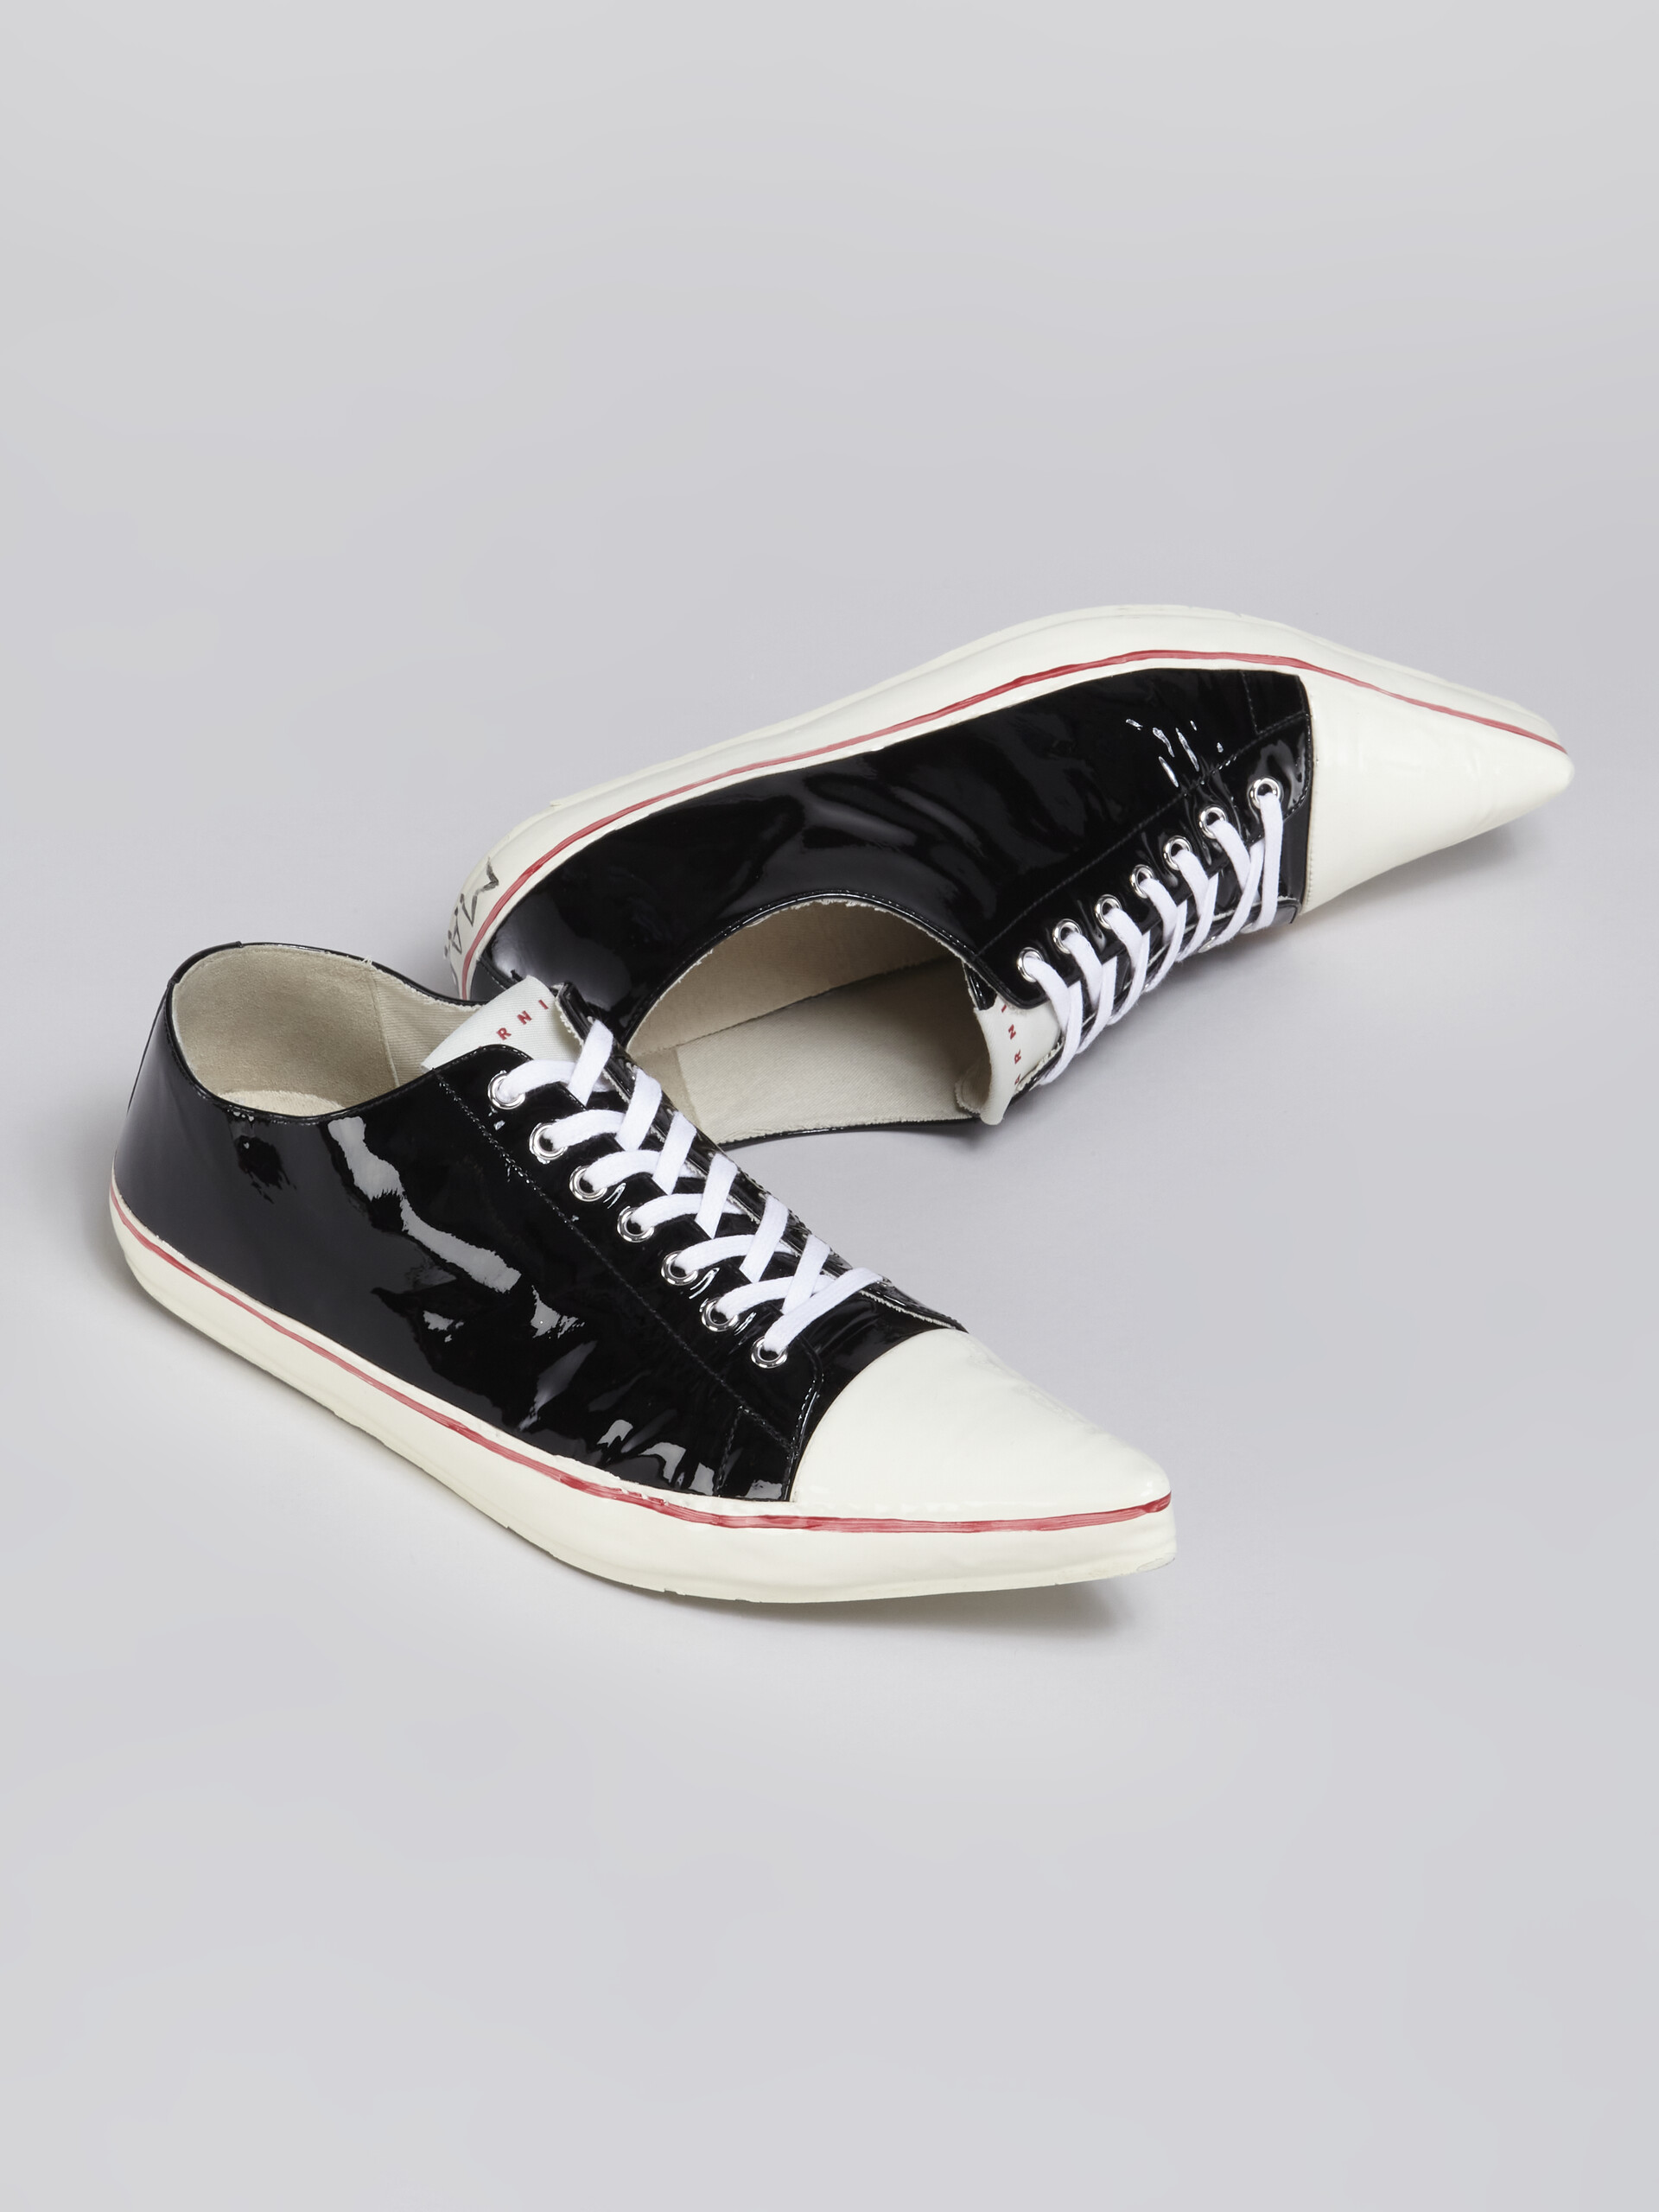 Patent leather GOOEY low-top sneaker - Sneakers - Image 5